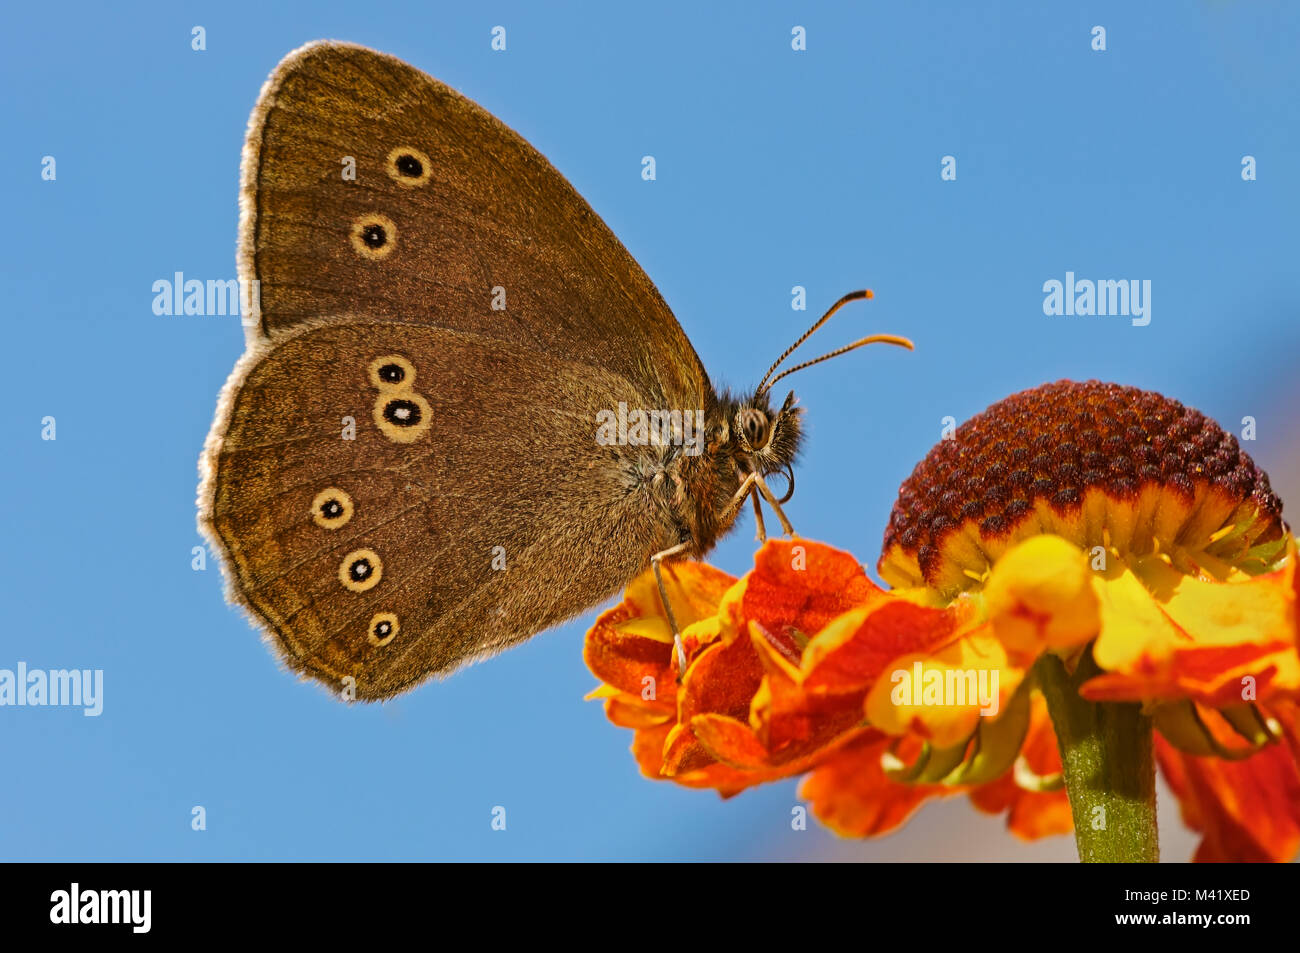 A Ringlet butterfly, Aphantopus hyperantus, feeding on an orange colored Helenium flower in front of blue sky, Rhineland, Germany Stock Photo